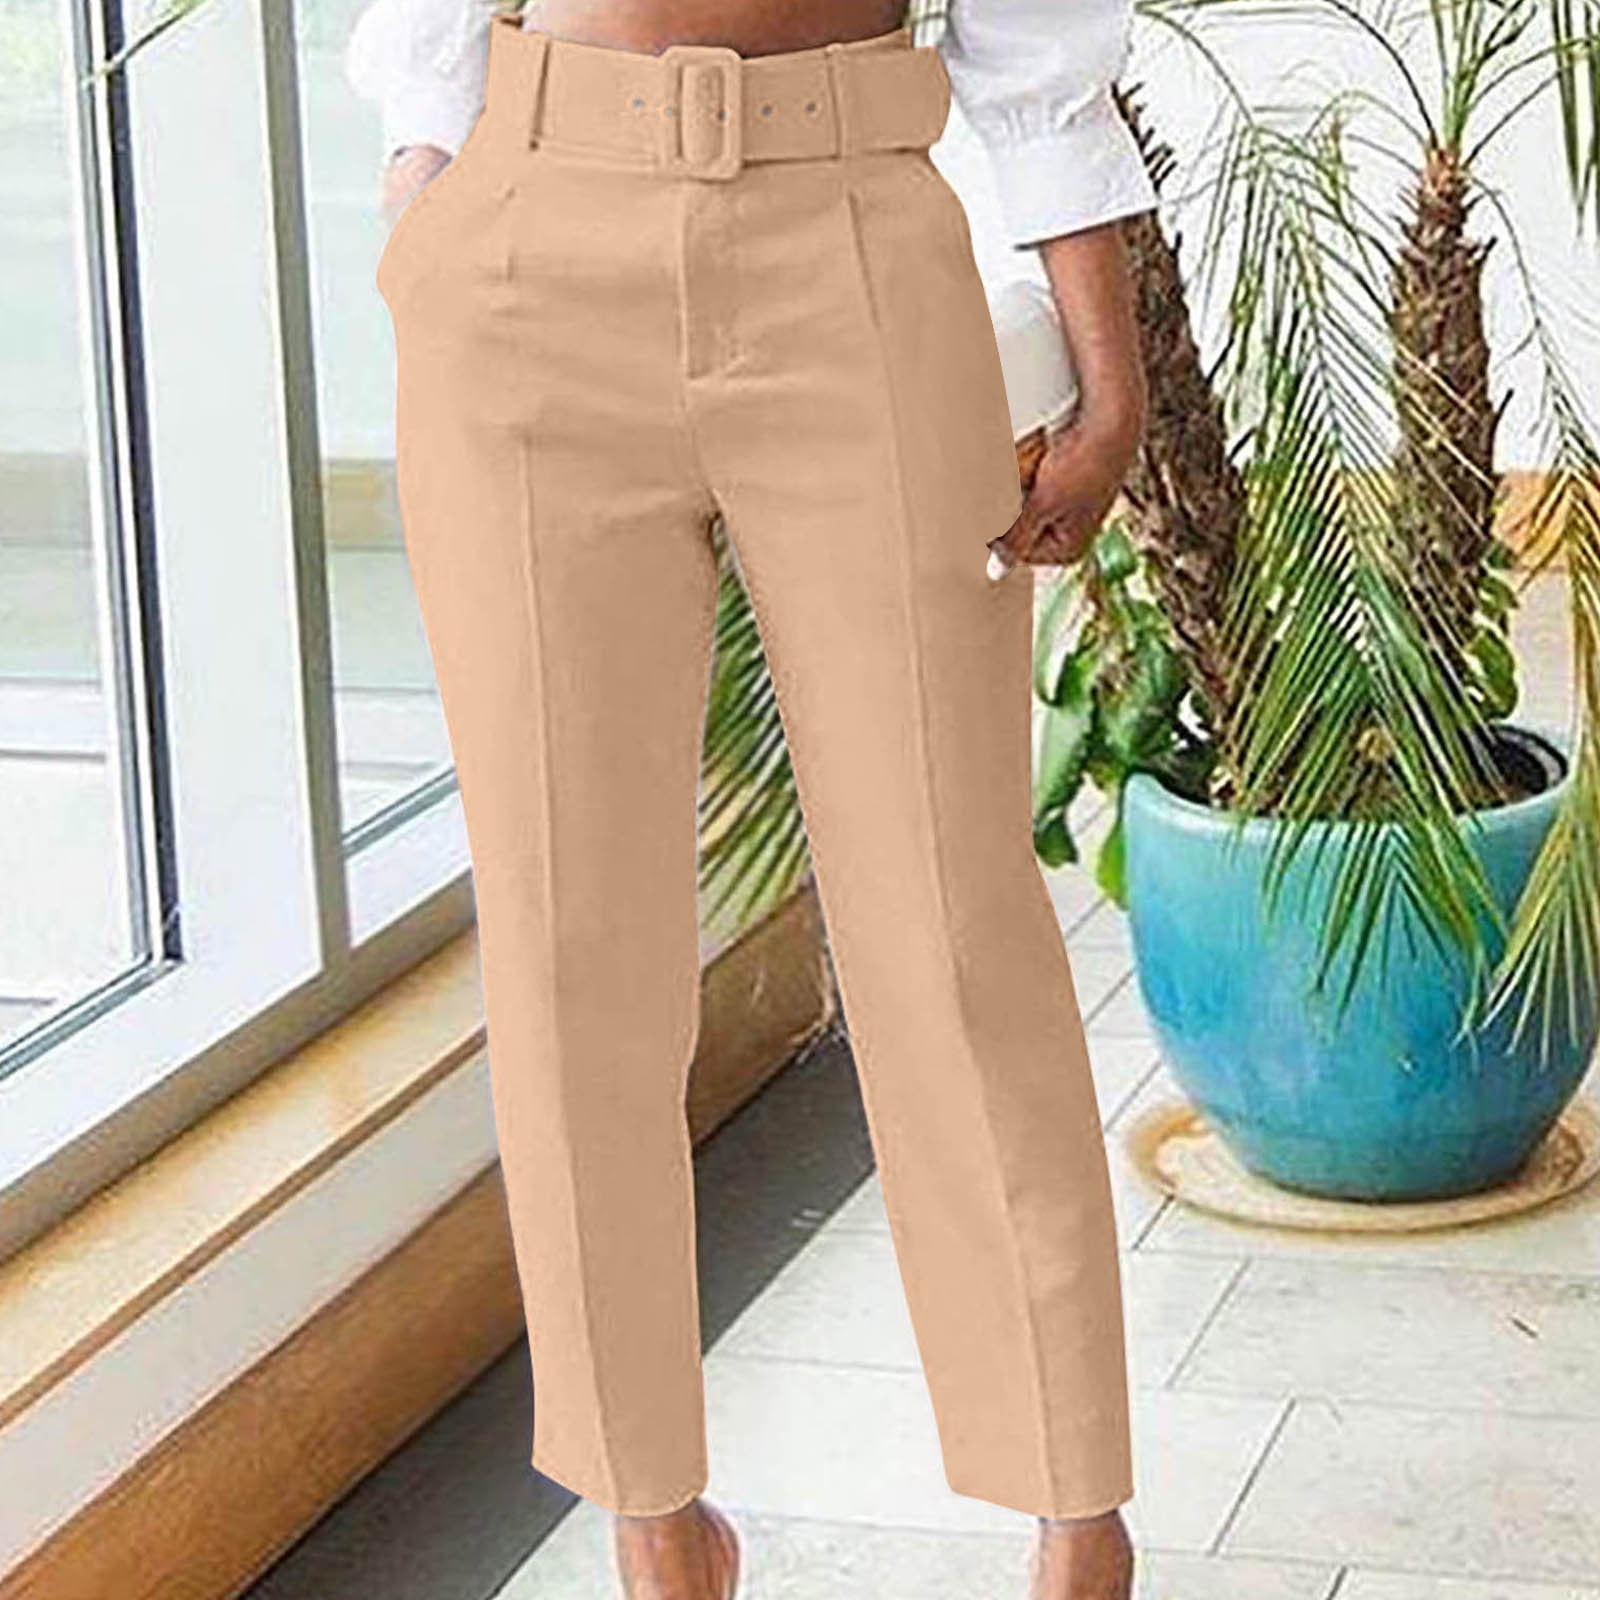 Oplxuo Women's High Waist Dress Pants, Solid Color Stretch Work Pants for  Women, Dress Slacks for Women Work Business Casual at  Women's  Clothing store